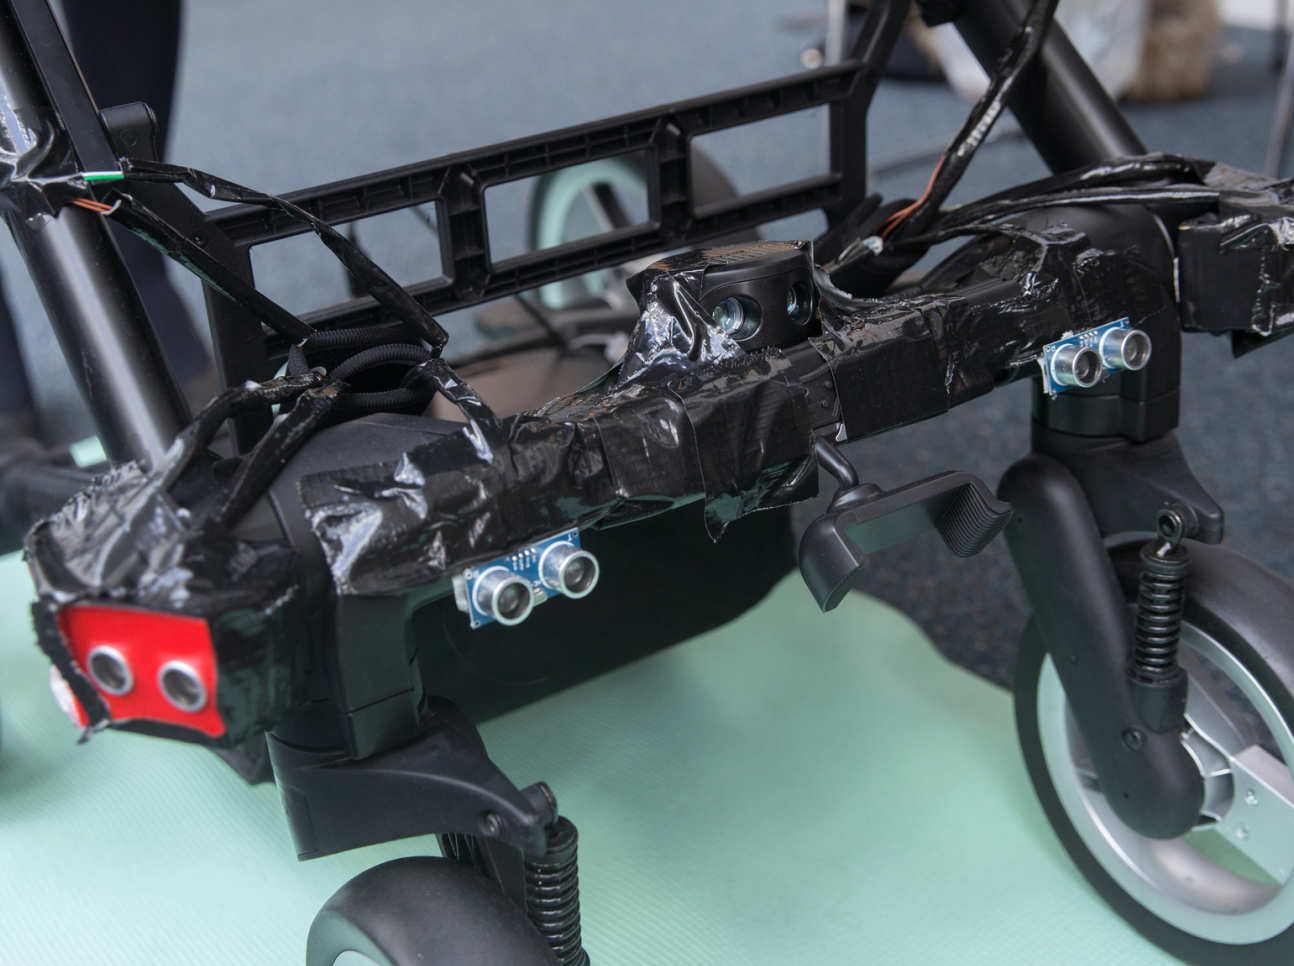 The sensors on the front of the buggy